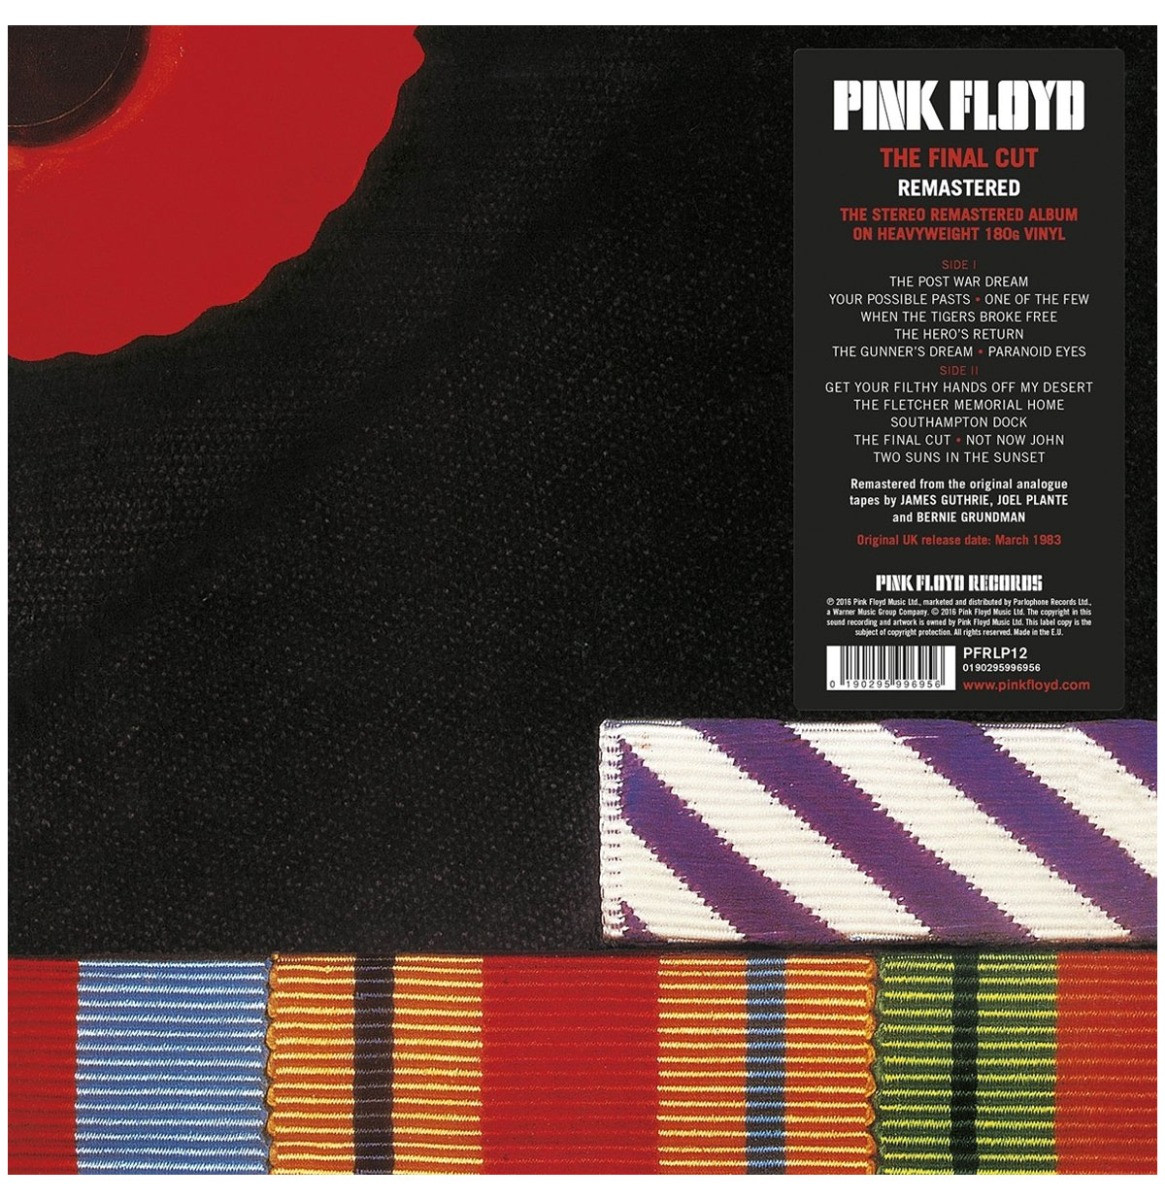 Pink Floyd - The Final Cut Remastered LP